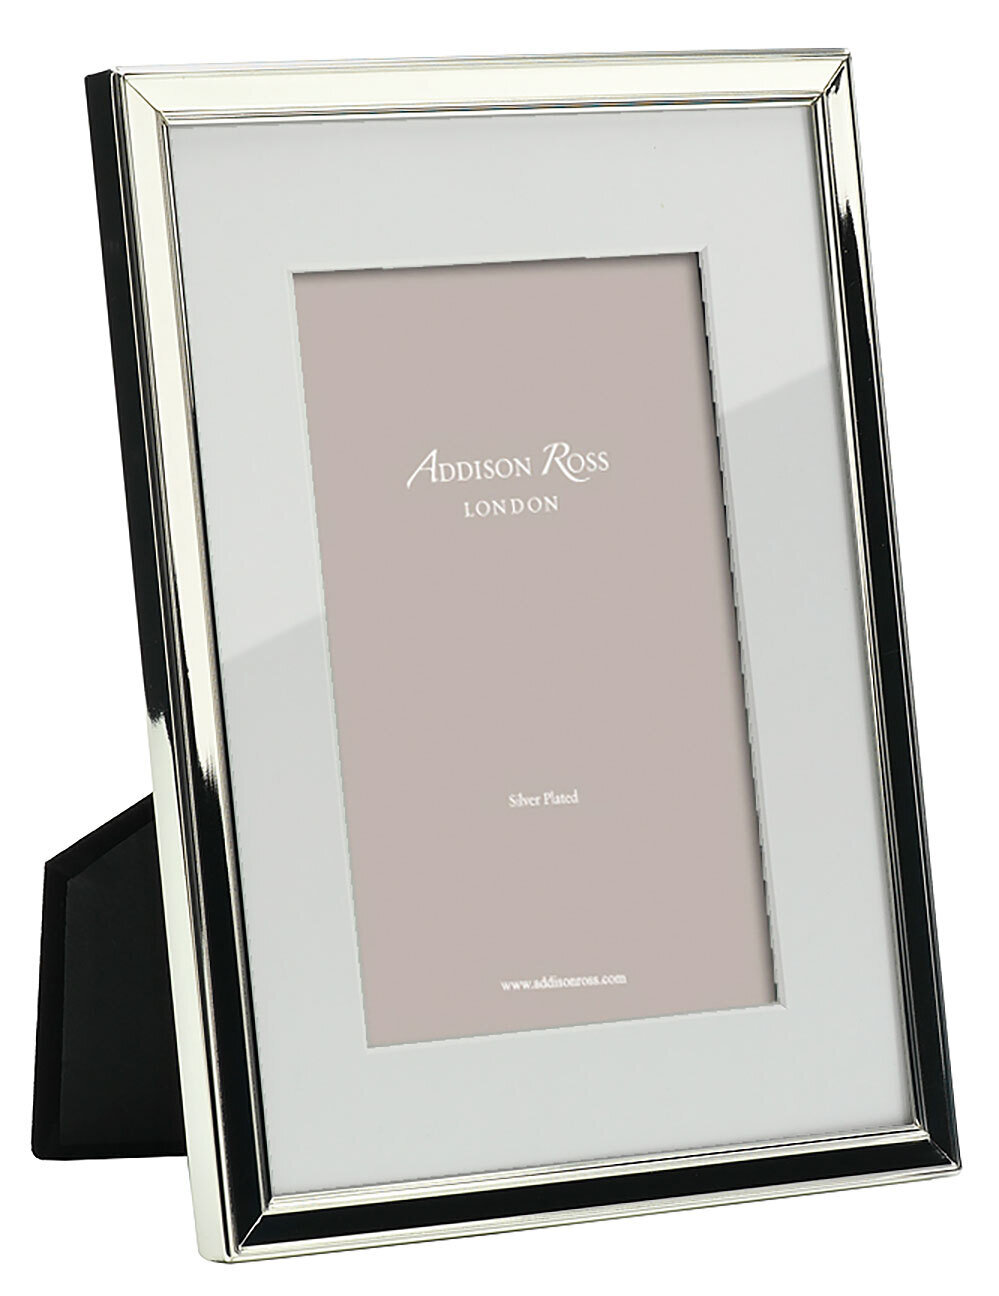 Addison Ross Photo Frame White Mount 6 x 8 InchSilver-plated FR0613